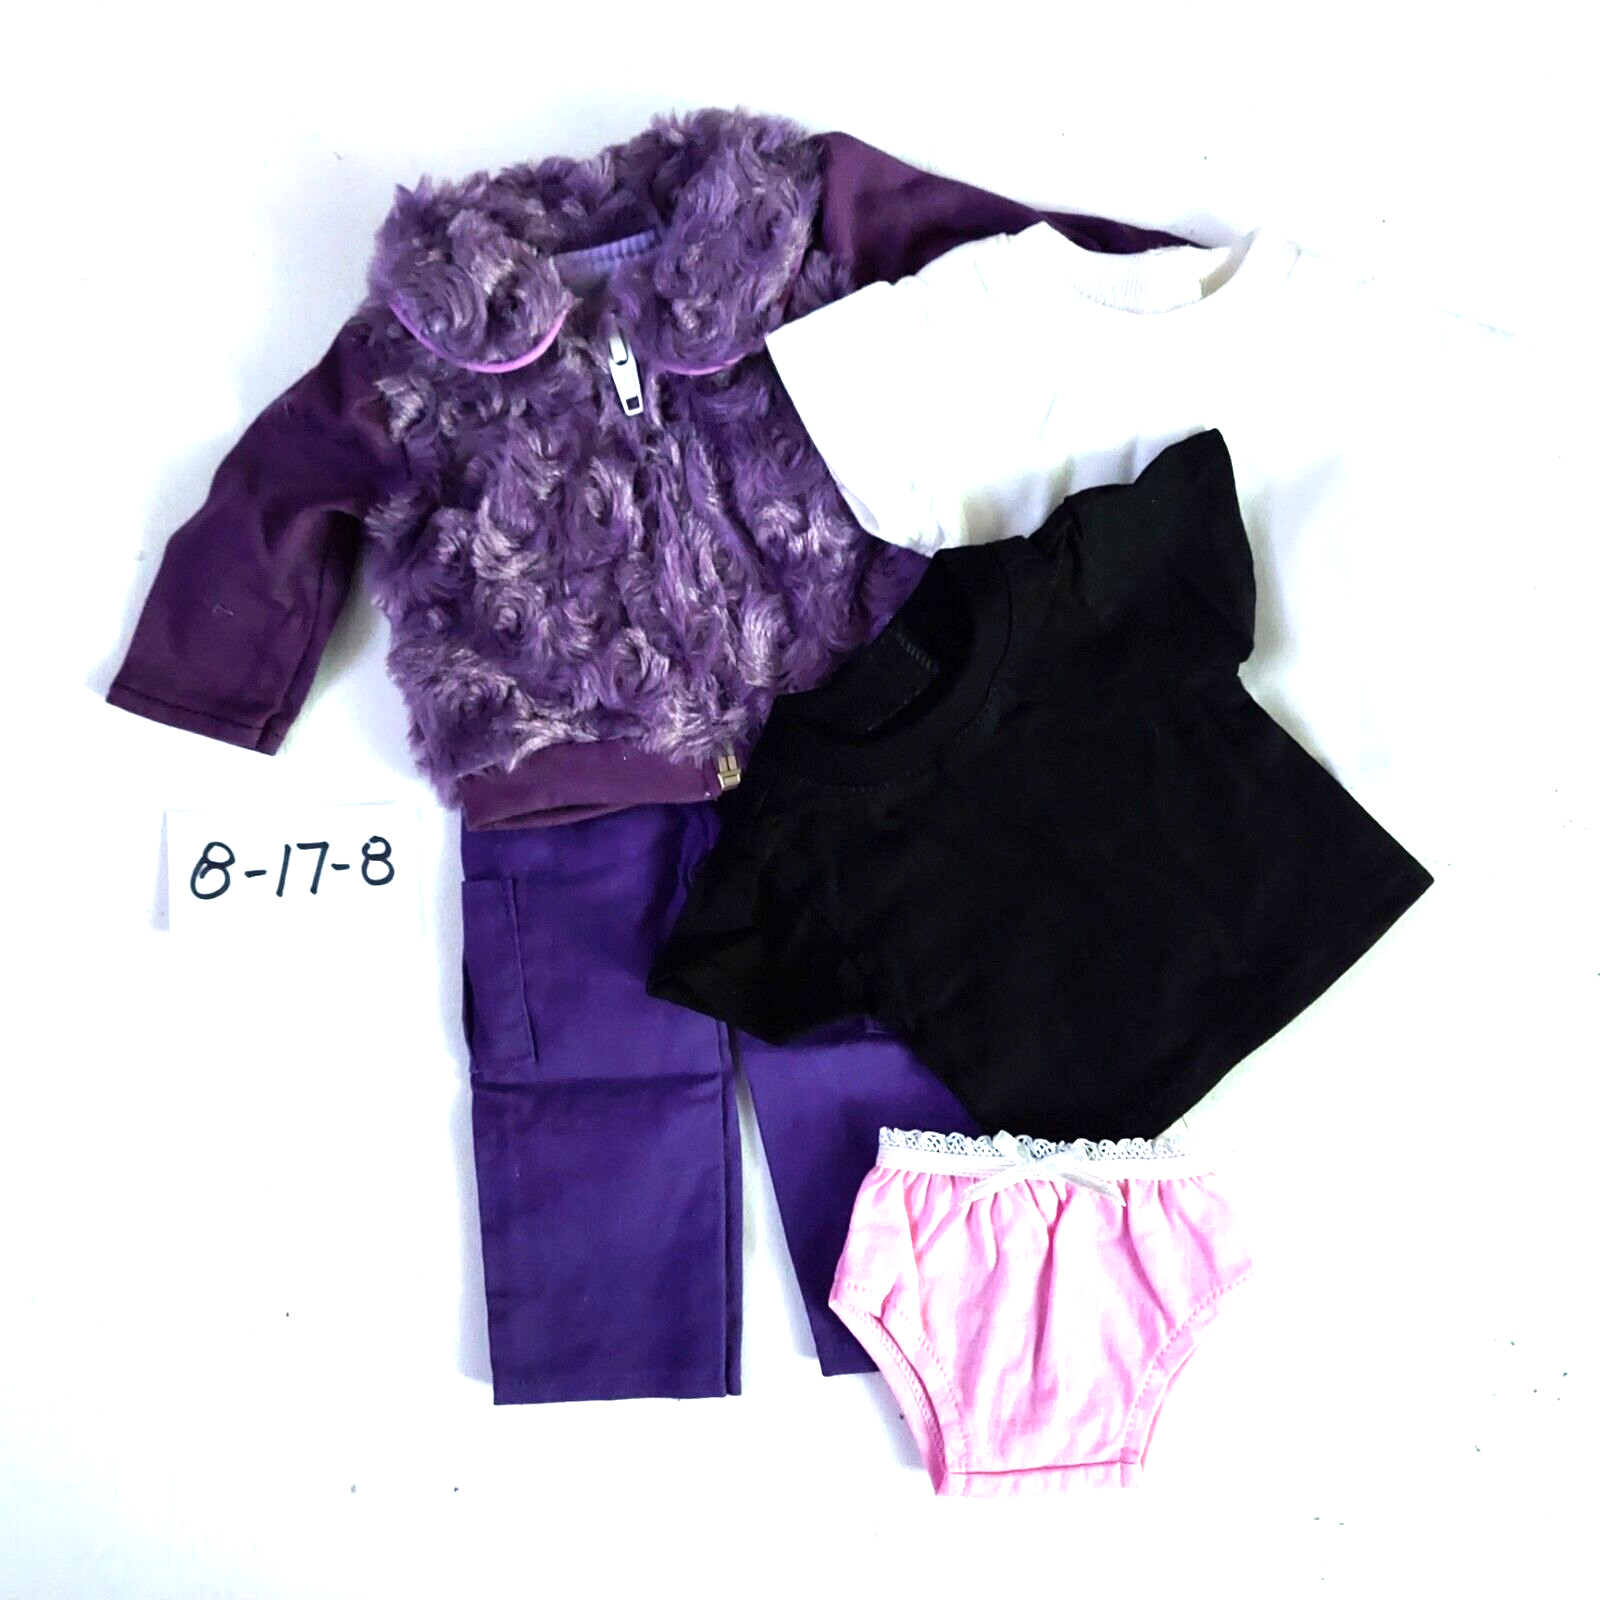 Doll Clothes # 8-17-8 fits 18inch American Girl, Lot american doll clothing does not apply